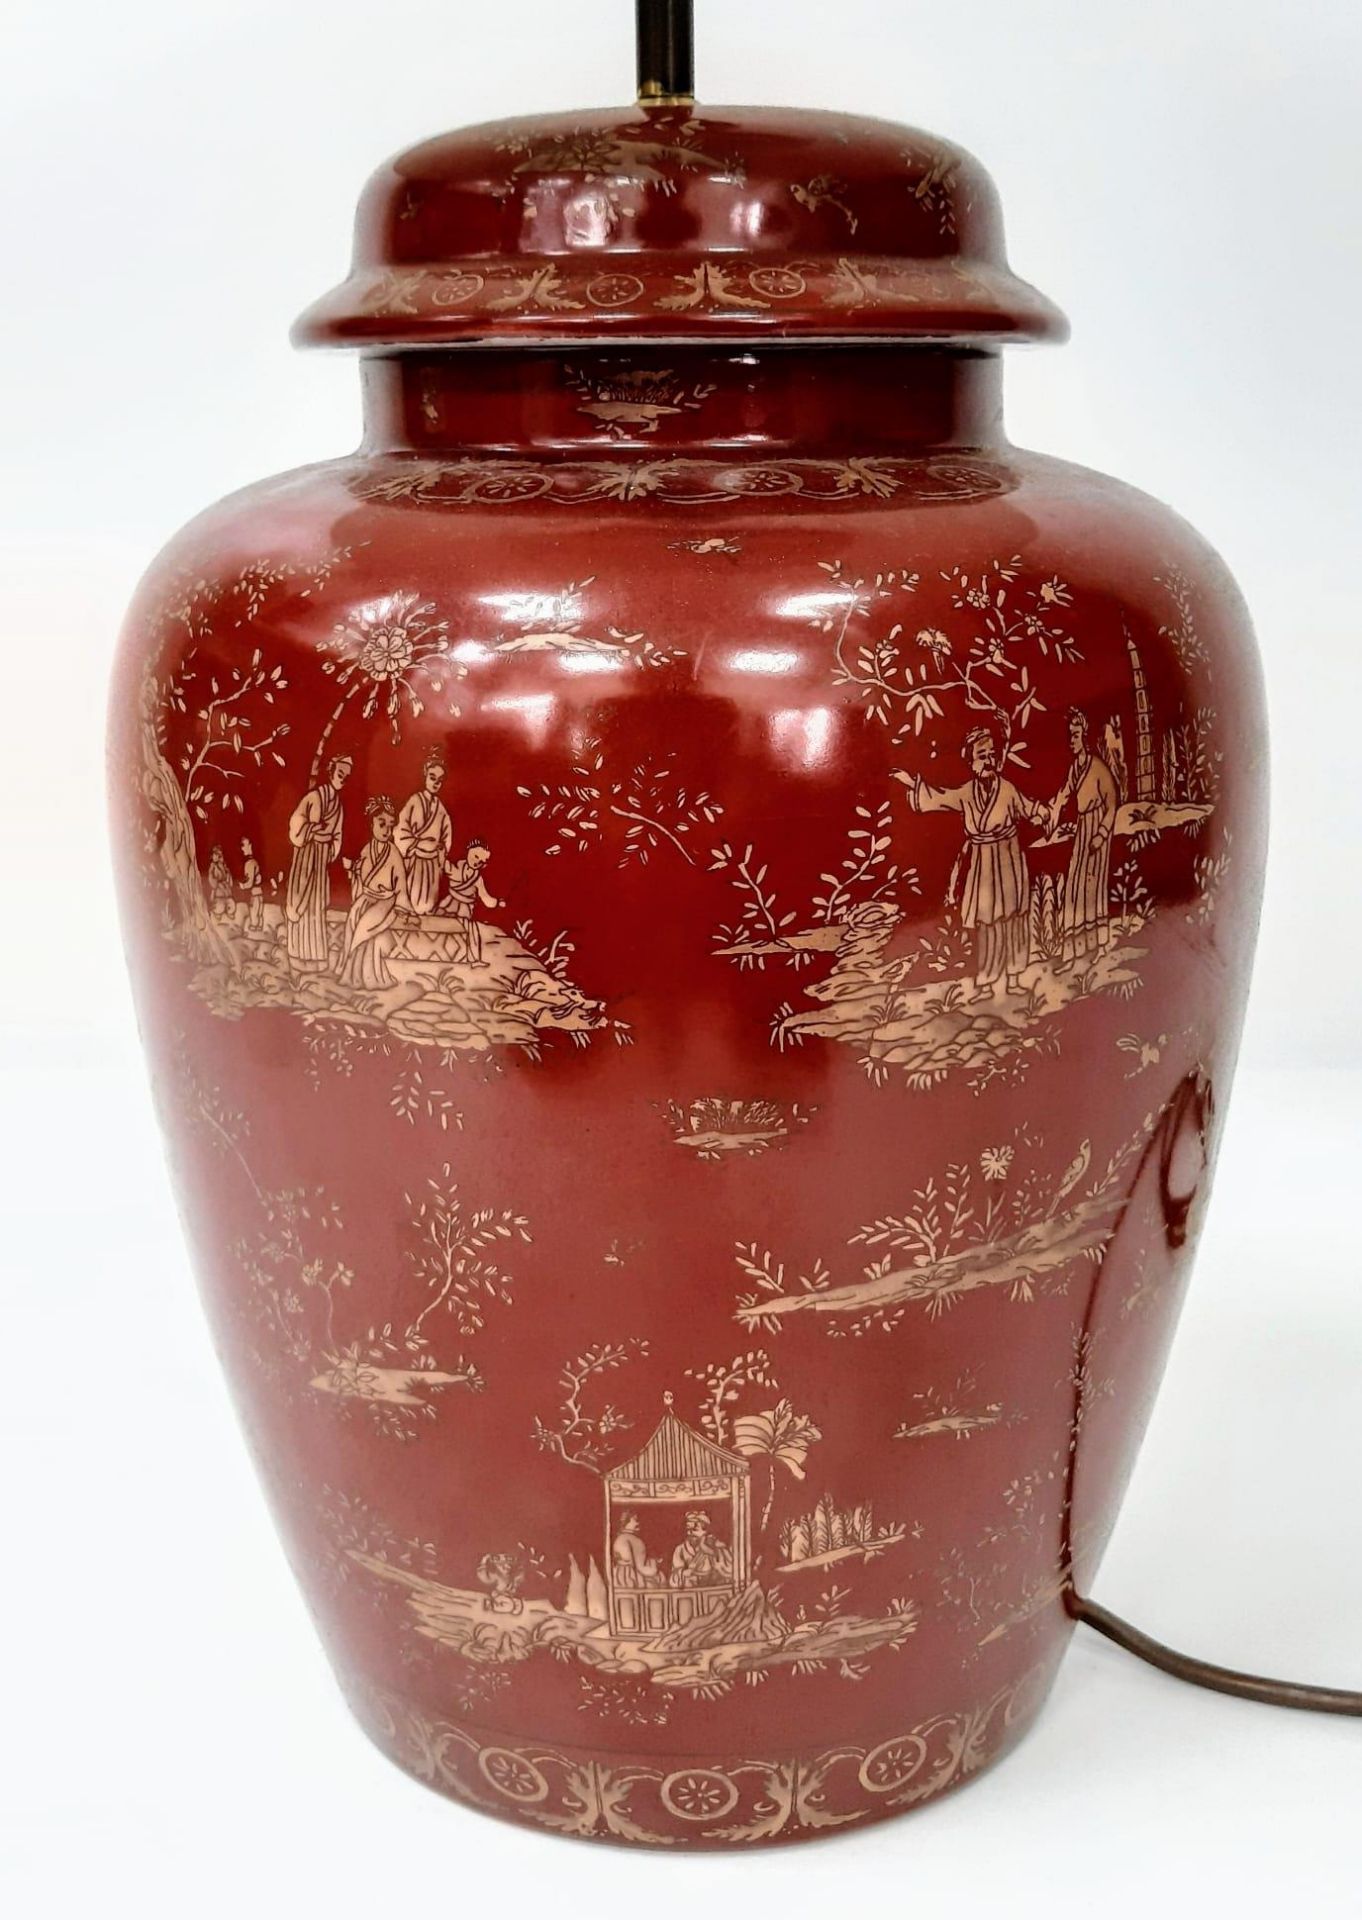 An Antique Chinese Large Vase Lamp Conversion. Wonderful red glaze with decorative gilded - Image 4 of 7